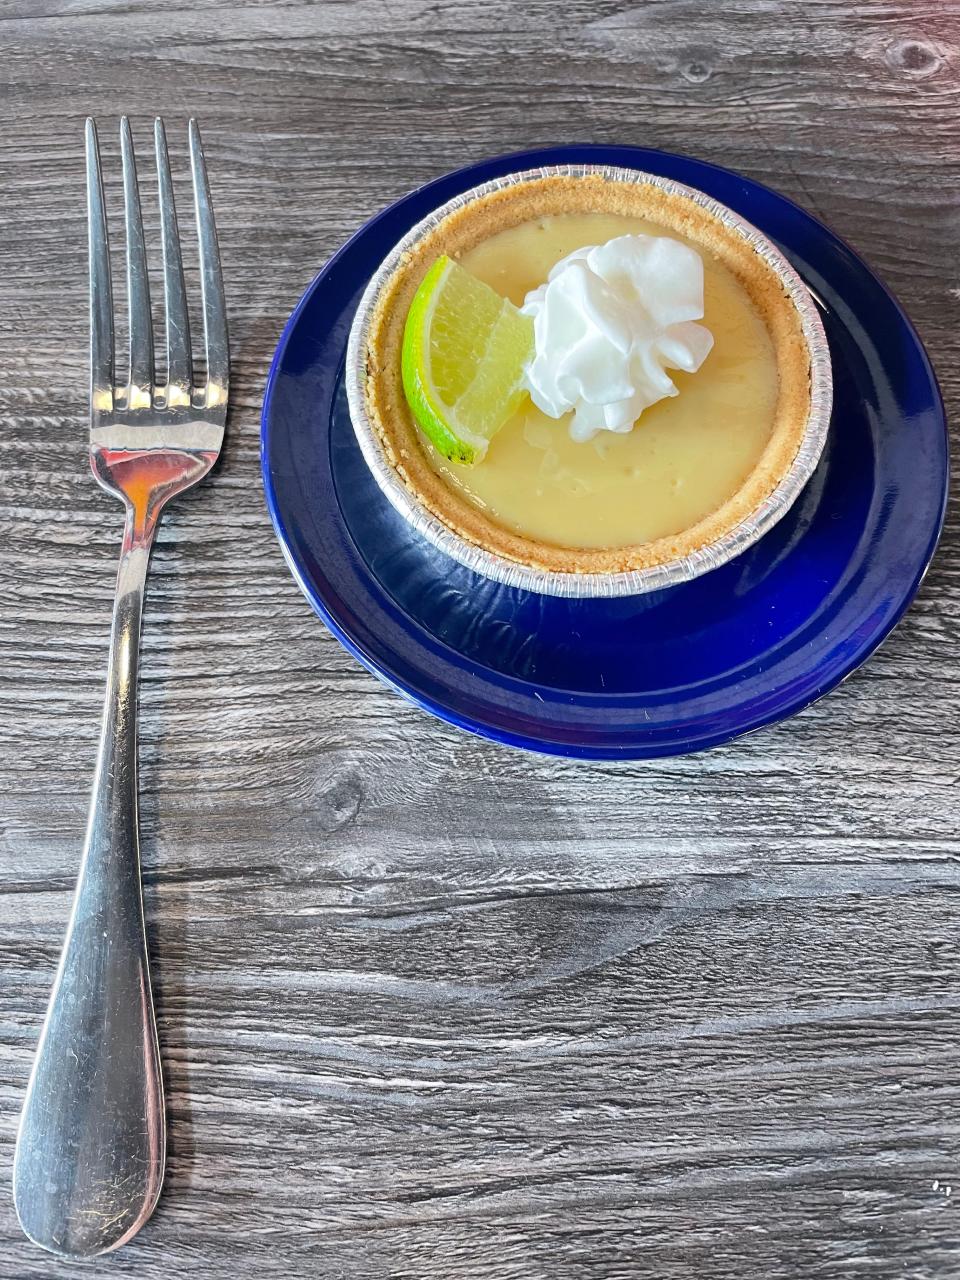 The key lime pie at Pinchy’s Lobster + Beer Company is small but sweet and tangy.